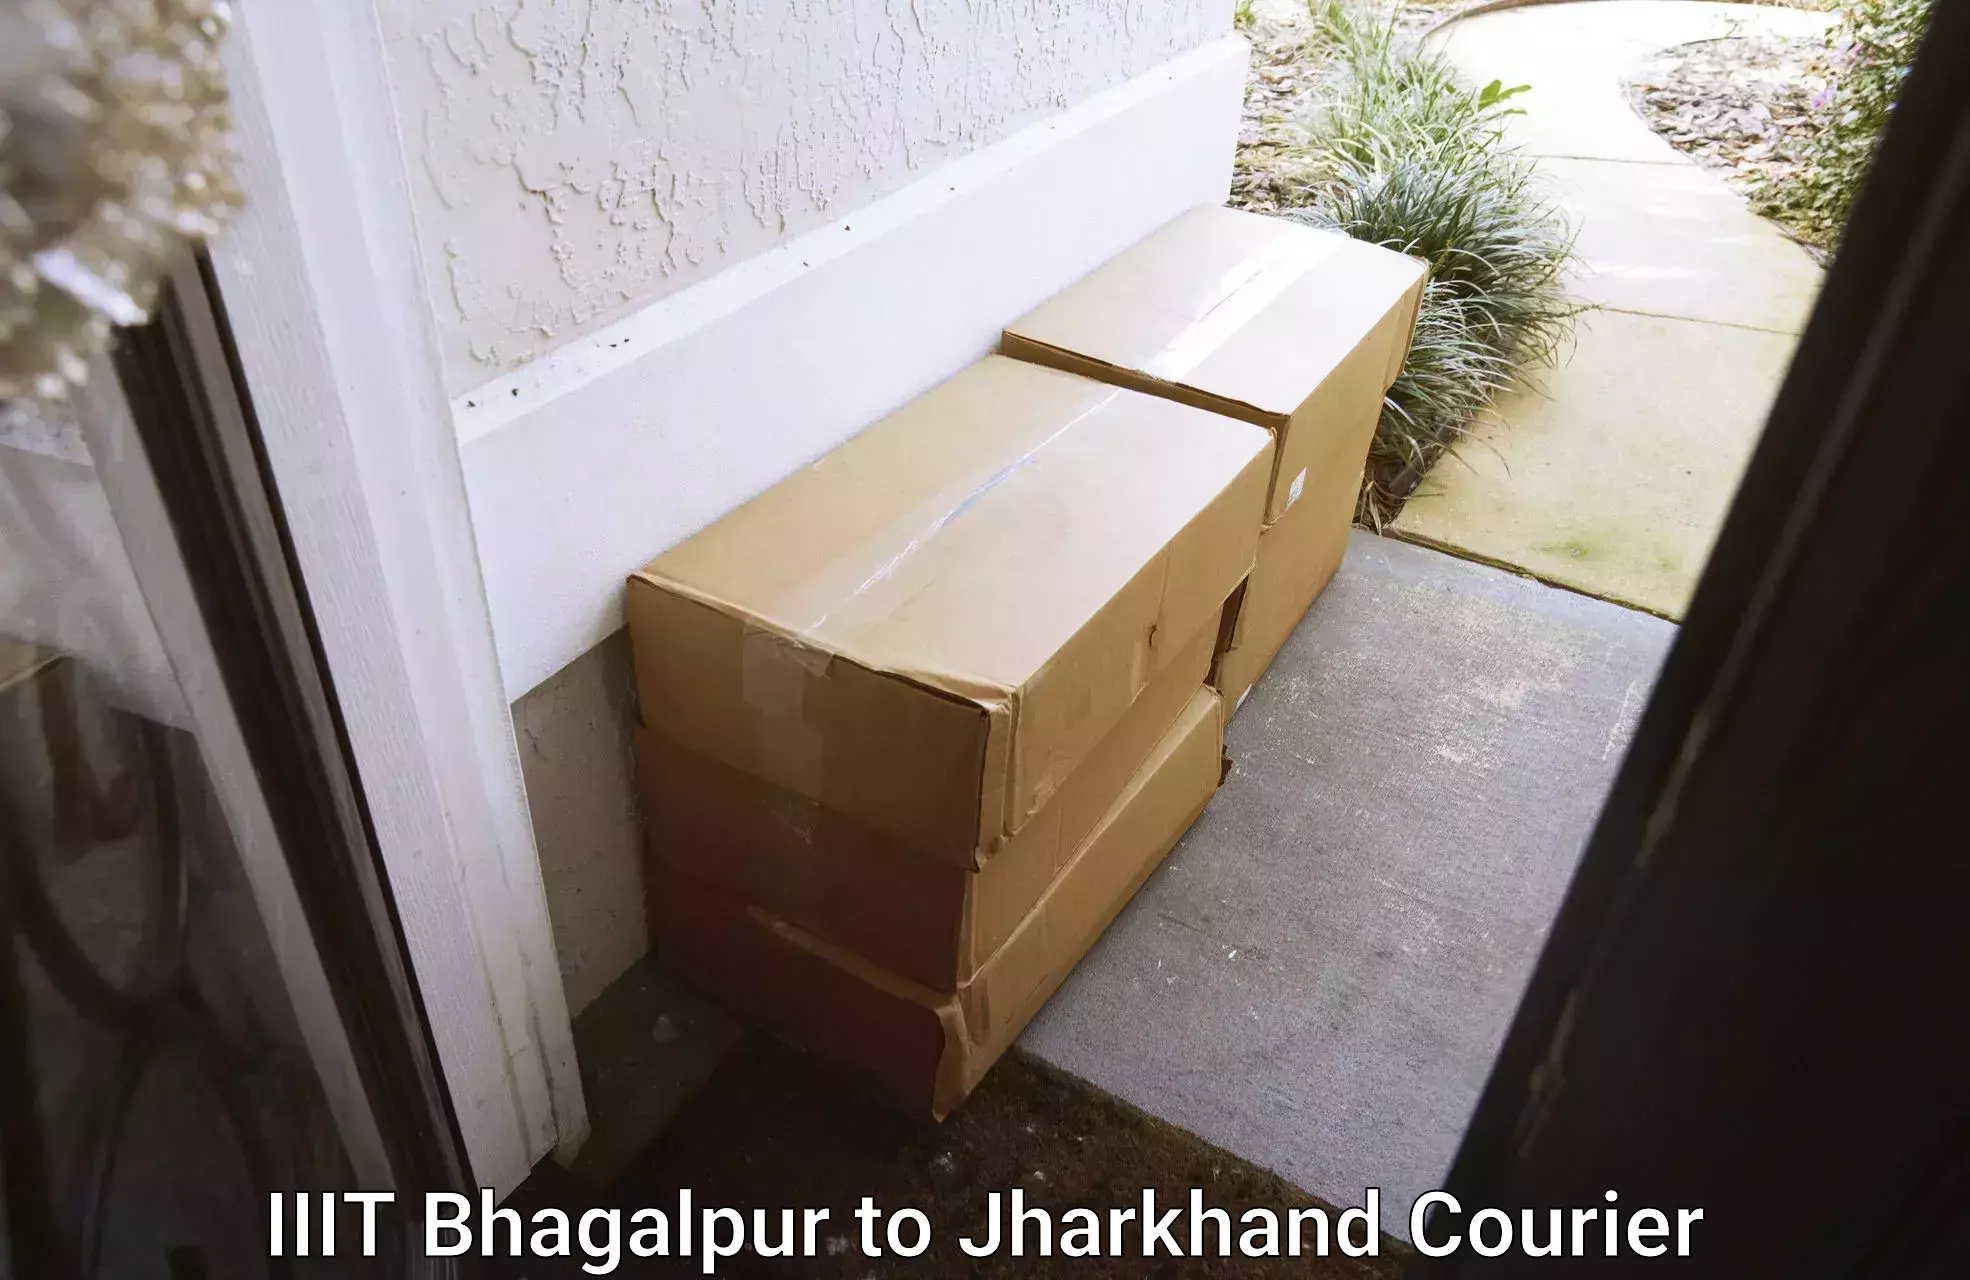 Tailored relocation services IIIT Bhagalpur to Dhanbad